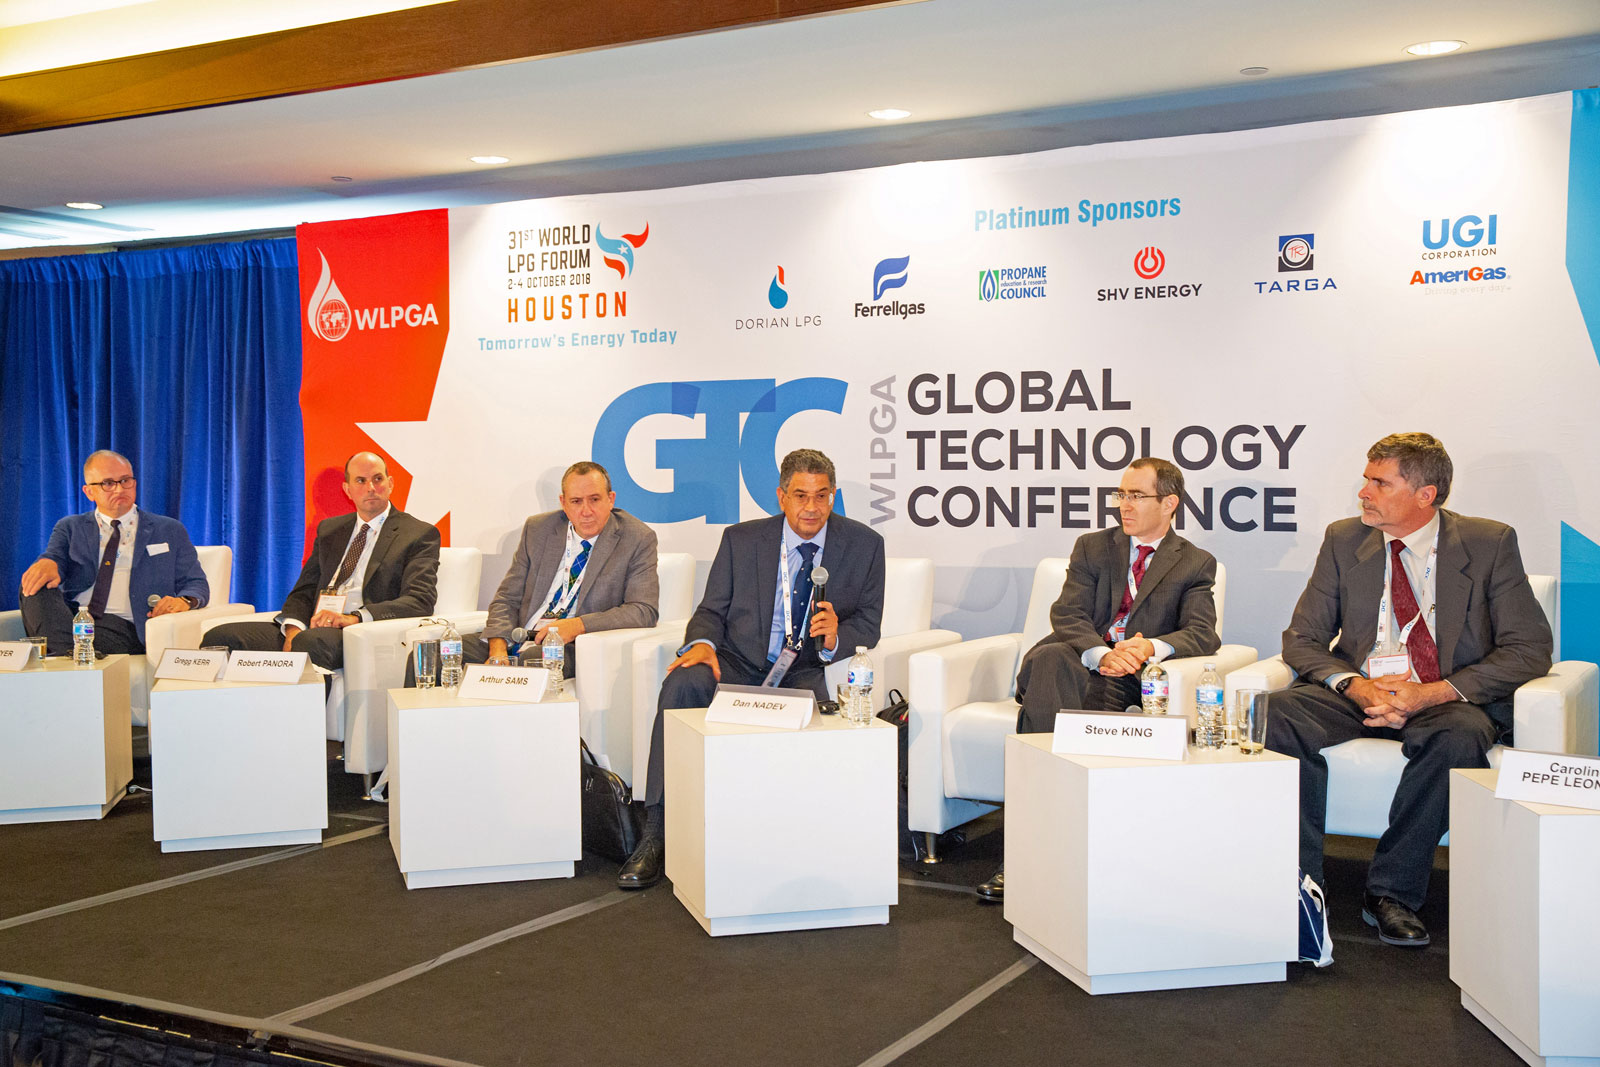 The 31st World LPG Forum wrapped up in Houston